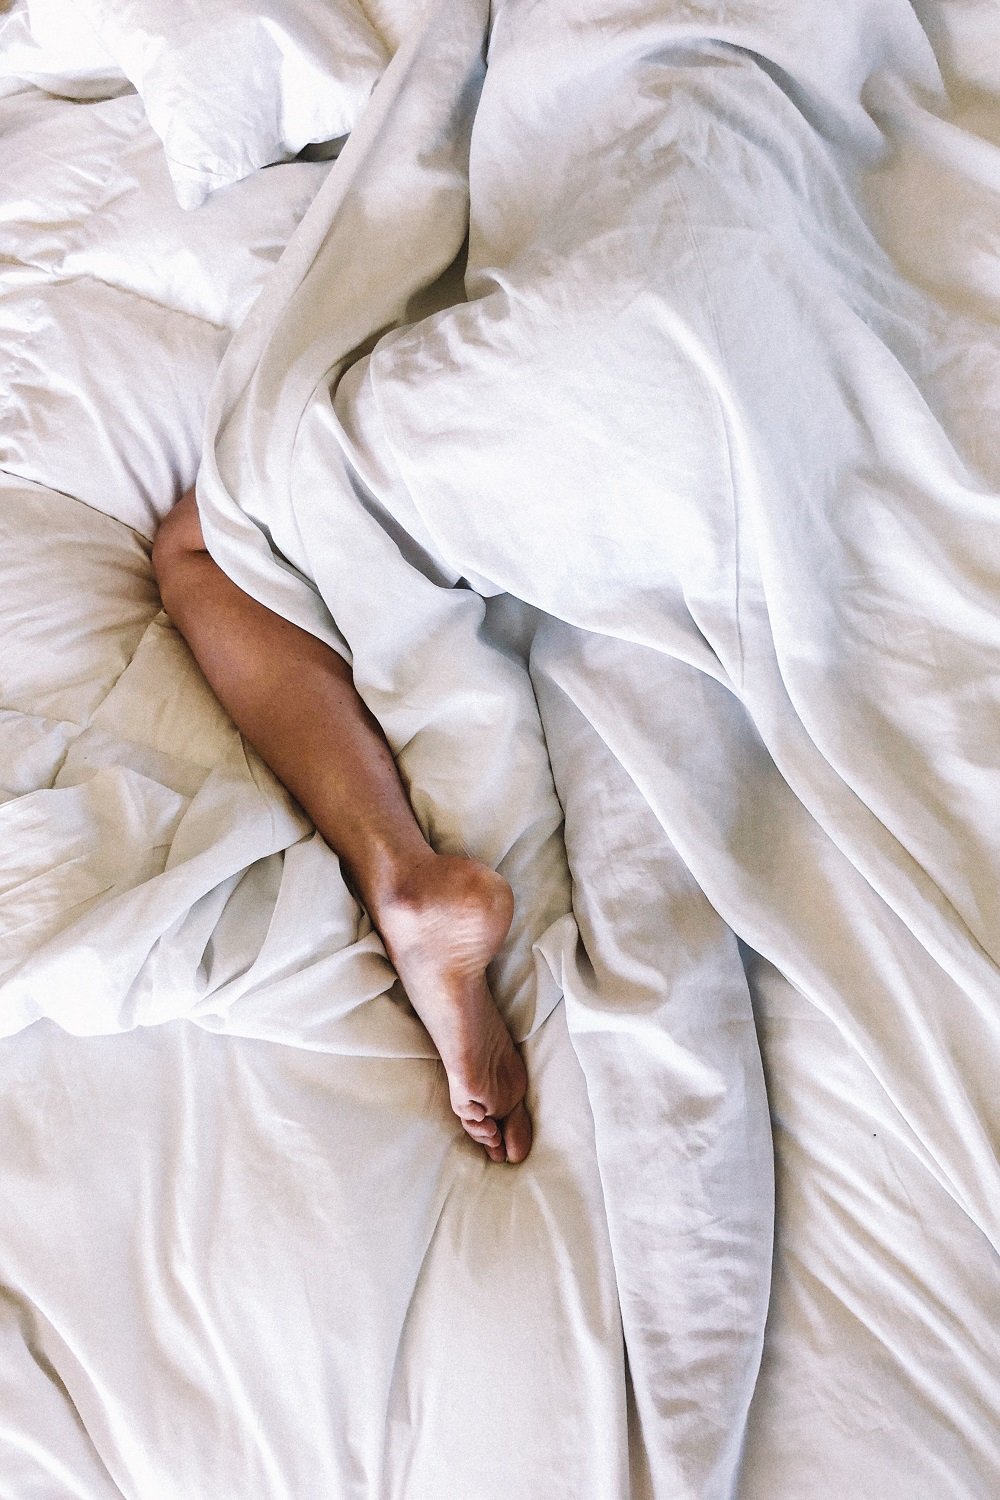 Woman on bed wrapped in sheets, ony one leg is showing